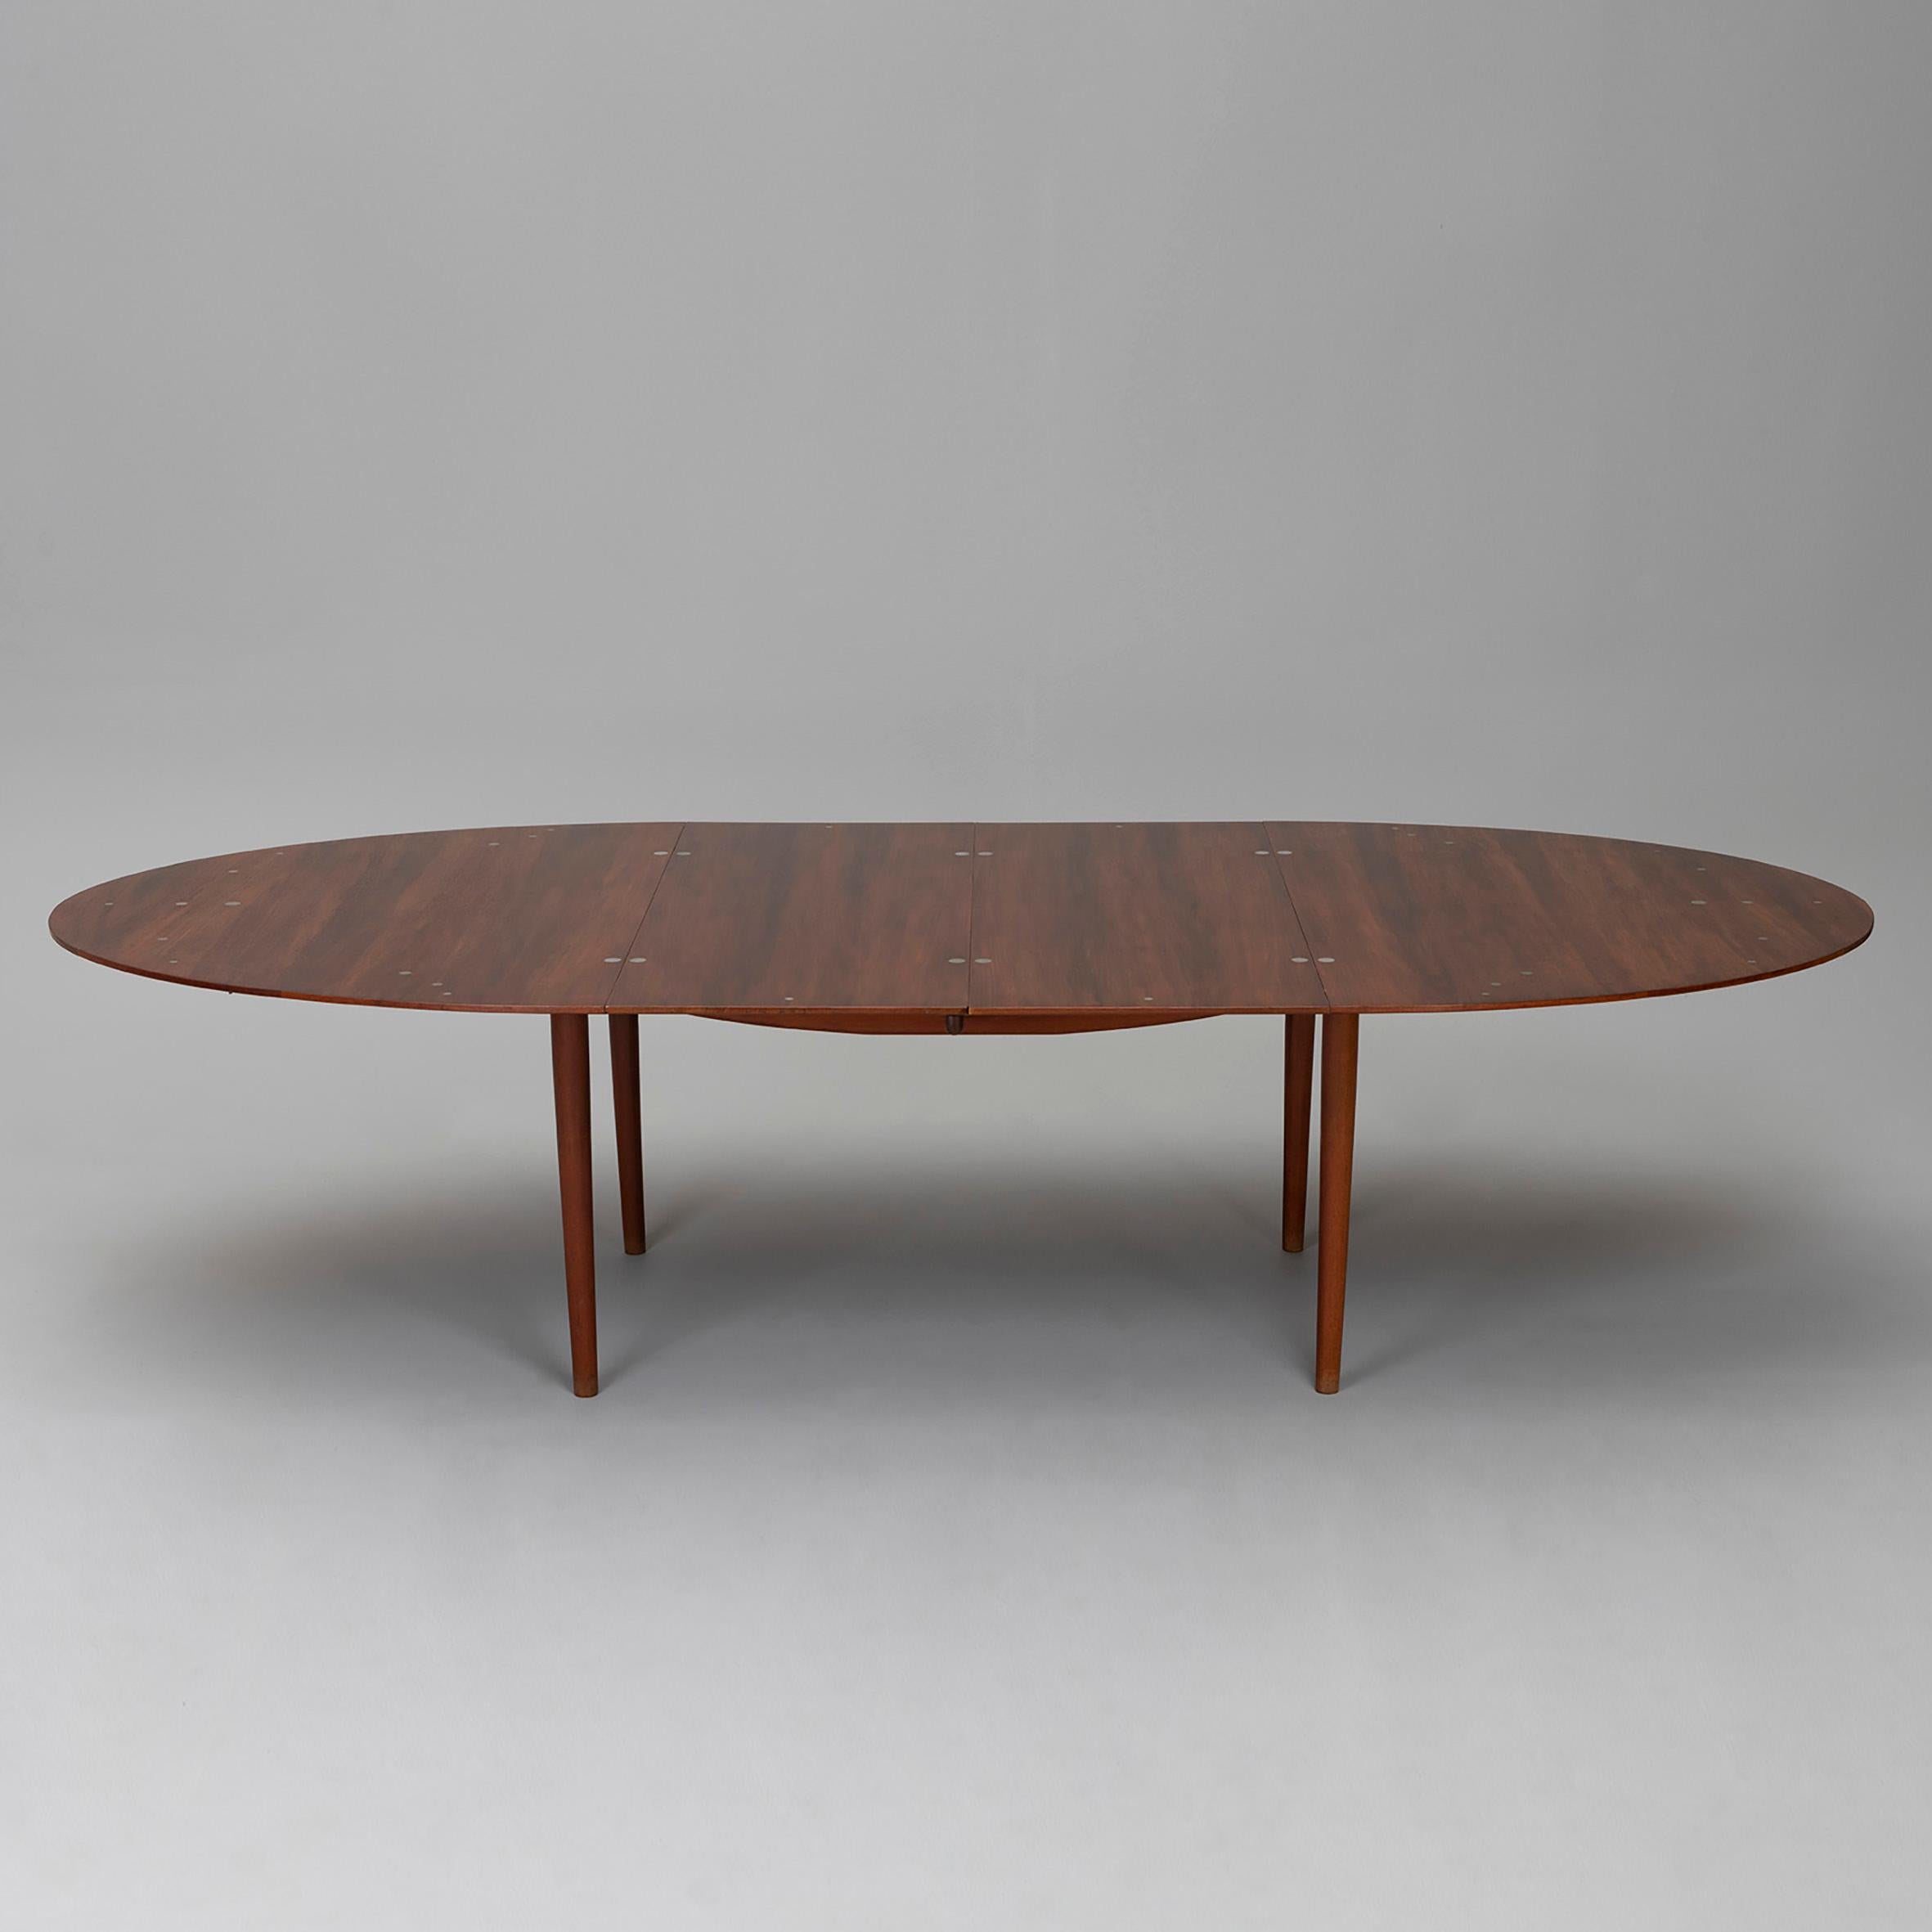 Finn Juhl (1912-1989)
 
“Judas”

An oval teak dining table with silver ‘coins’ inlays and two extension leaves on four feet.
Branded ‘Cabinetmaker Niels Vodder / Copenhagen Denmark / Design: Finn Juhl’.
Produced by Niels Vodder,